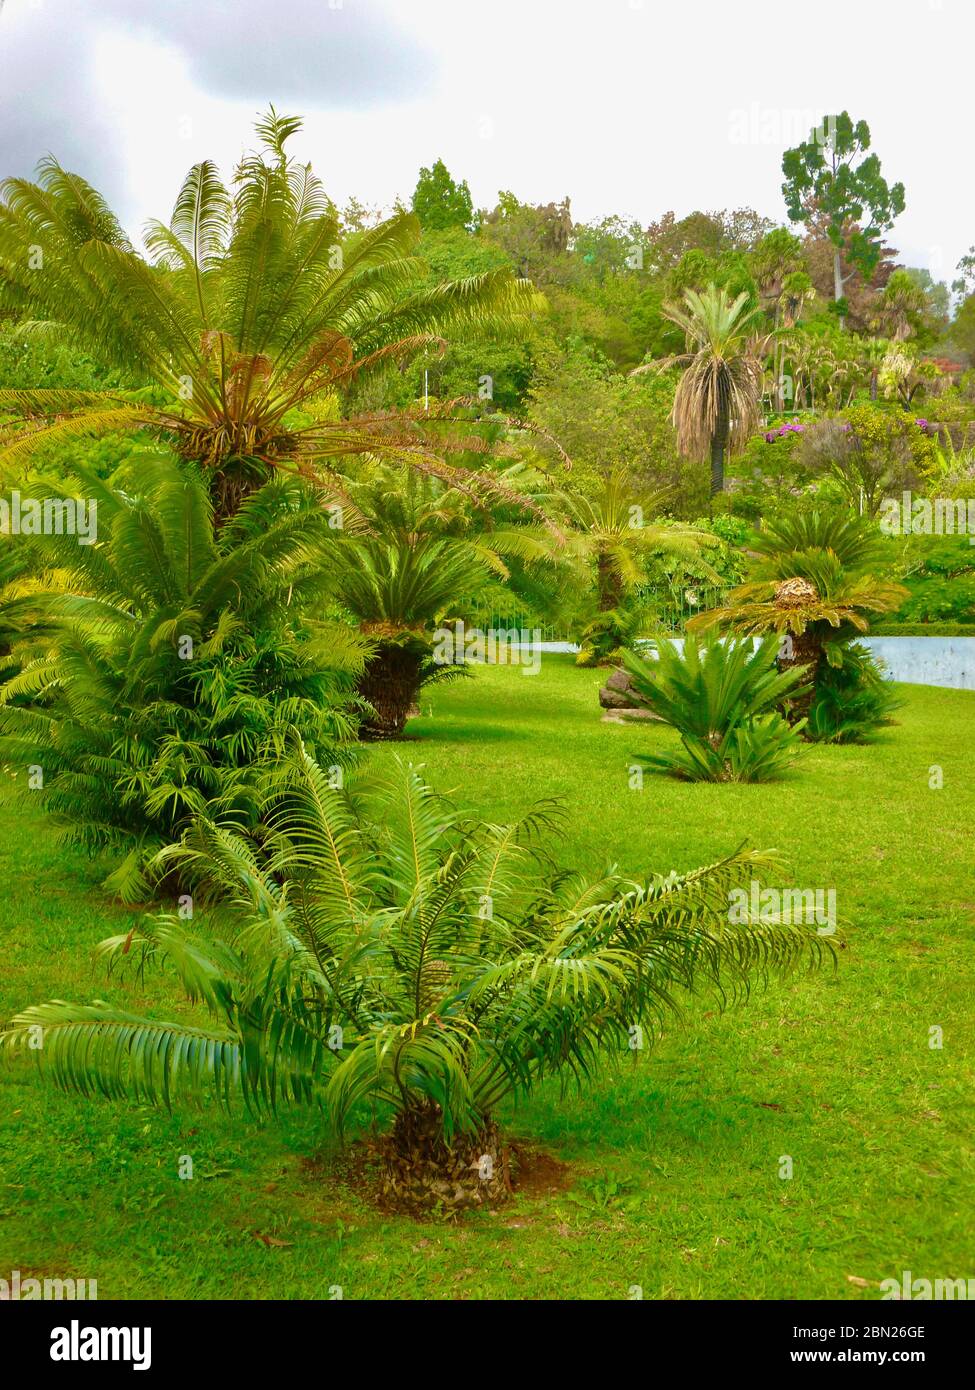 Landscaped garden showing various types of palm tree on lawn Stock Photo